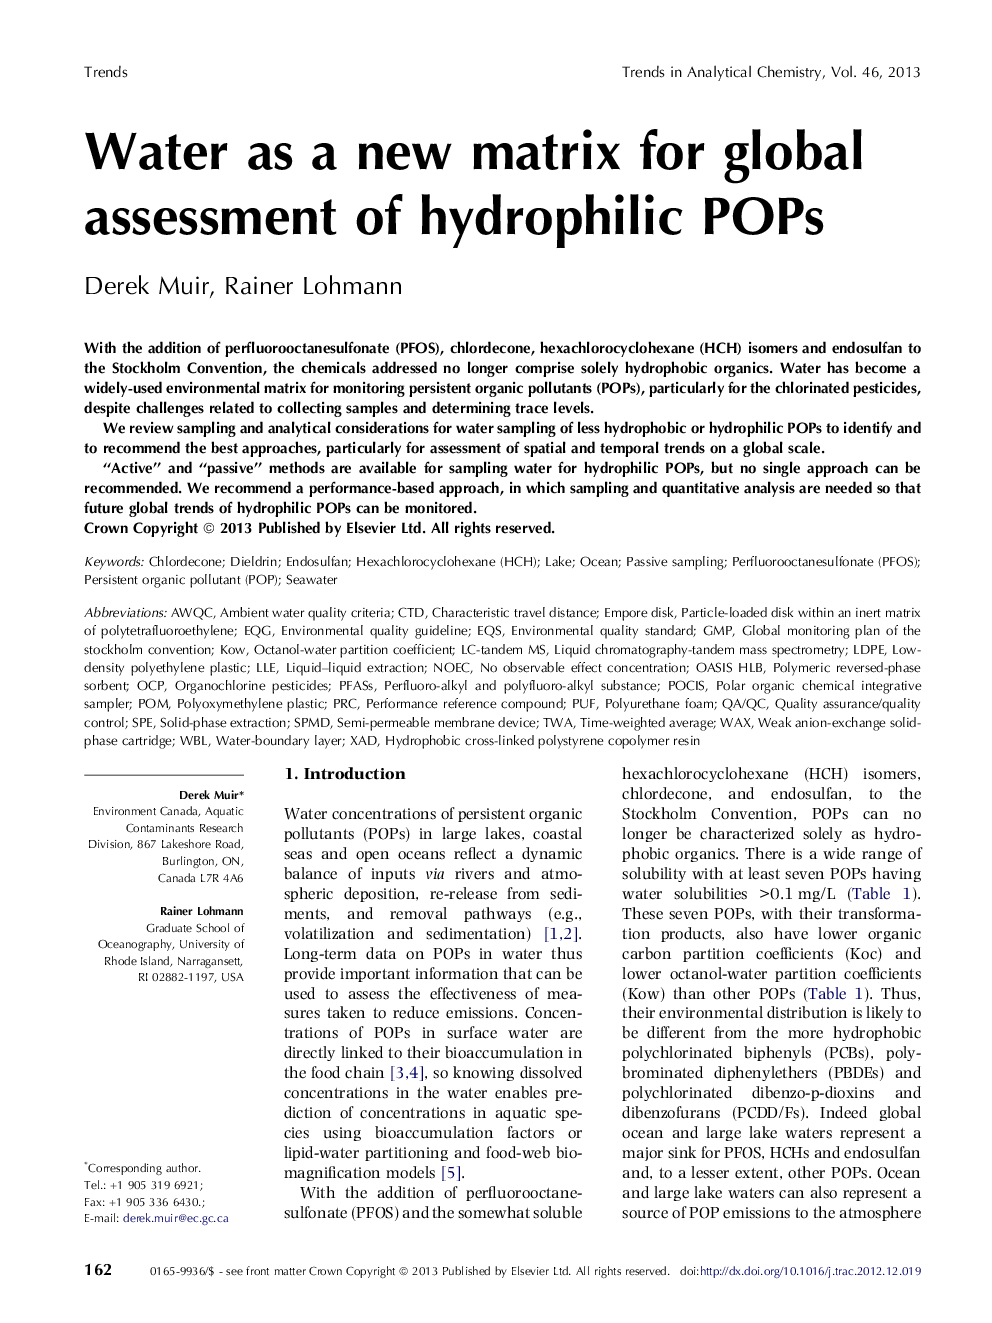 Water as a new matrix for global assessment of hydrophilic POPs